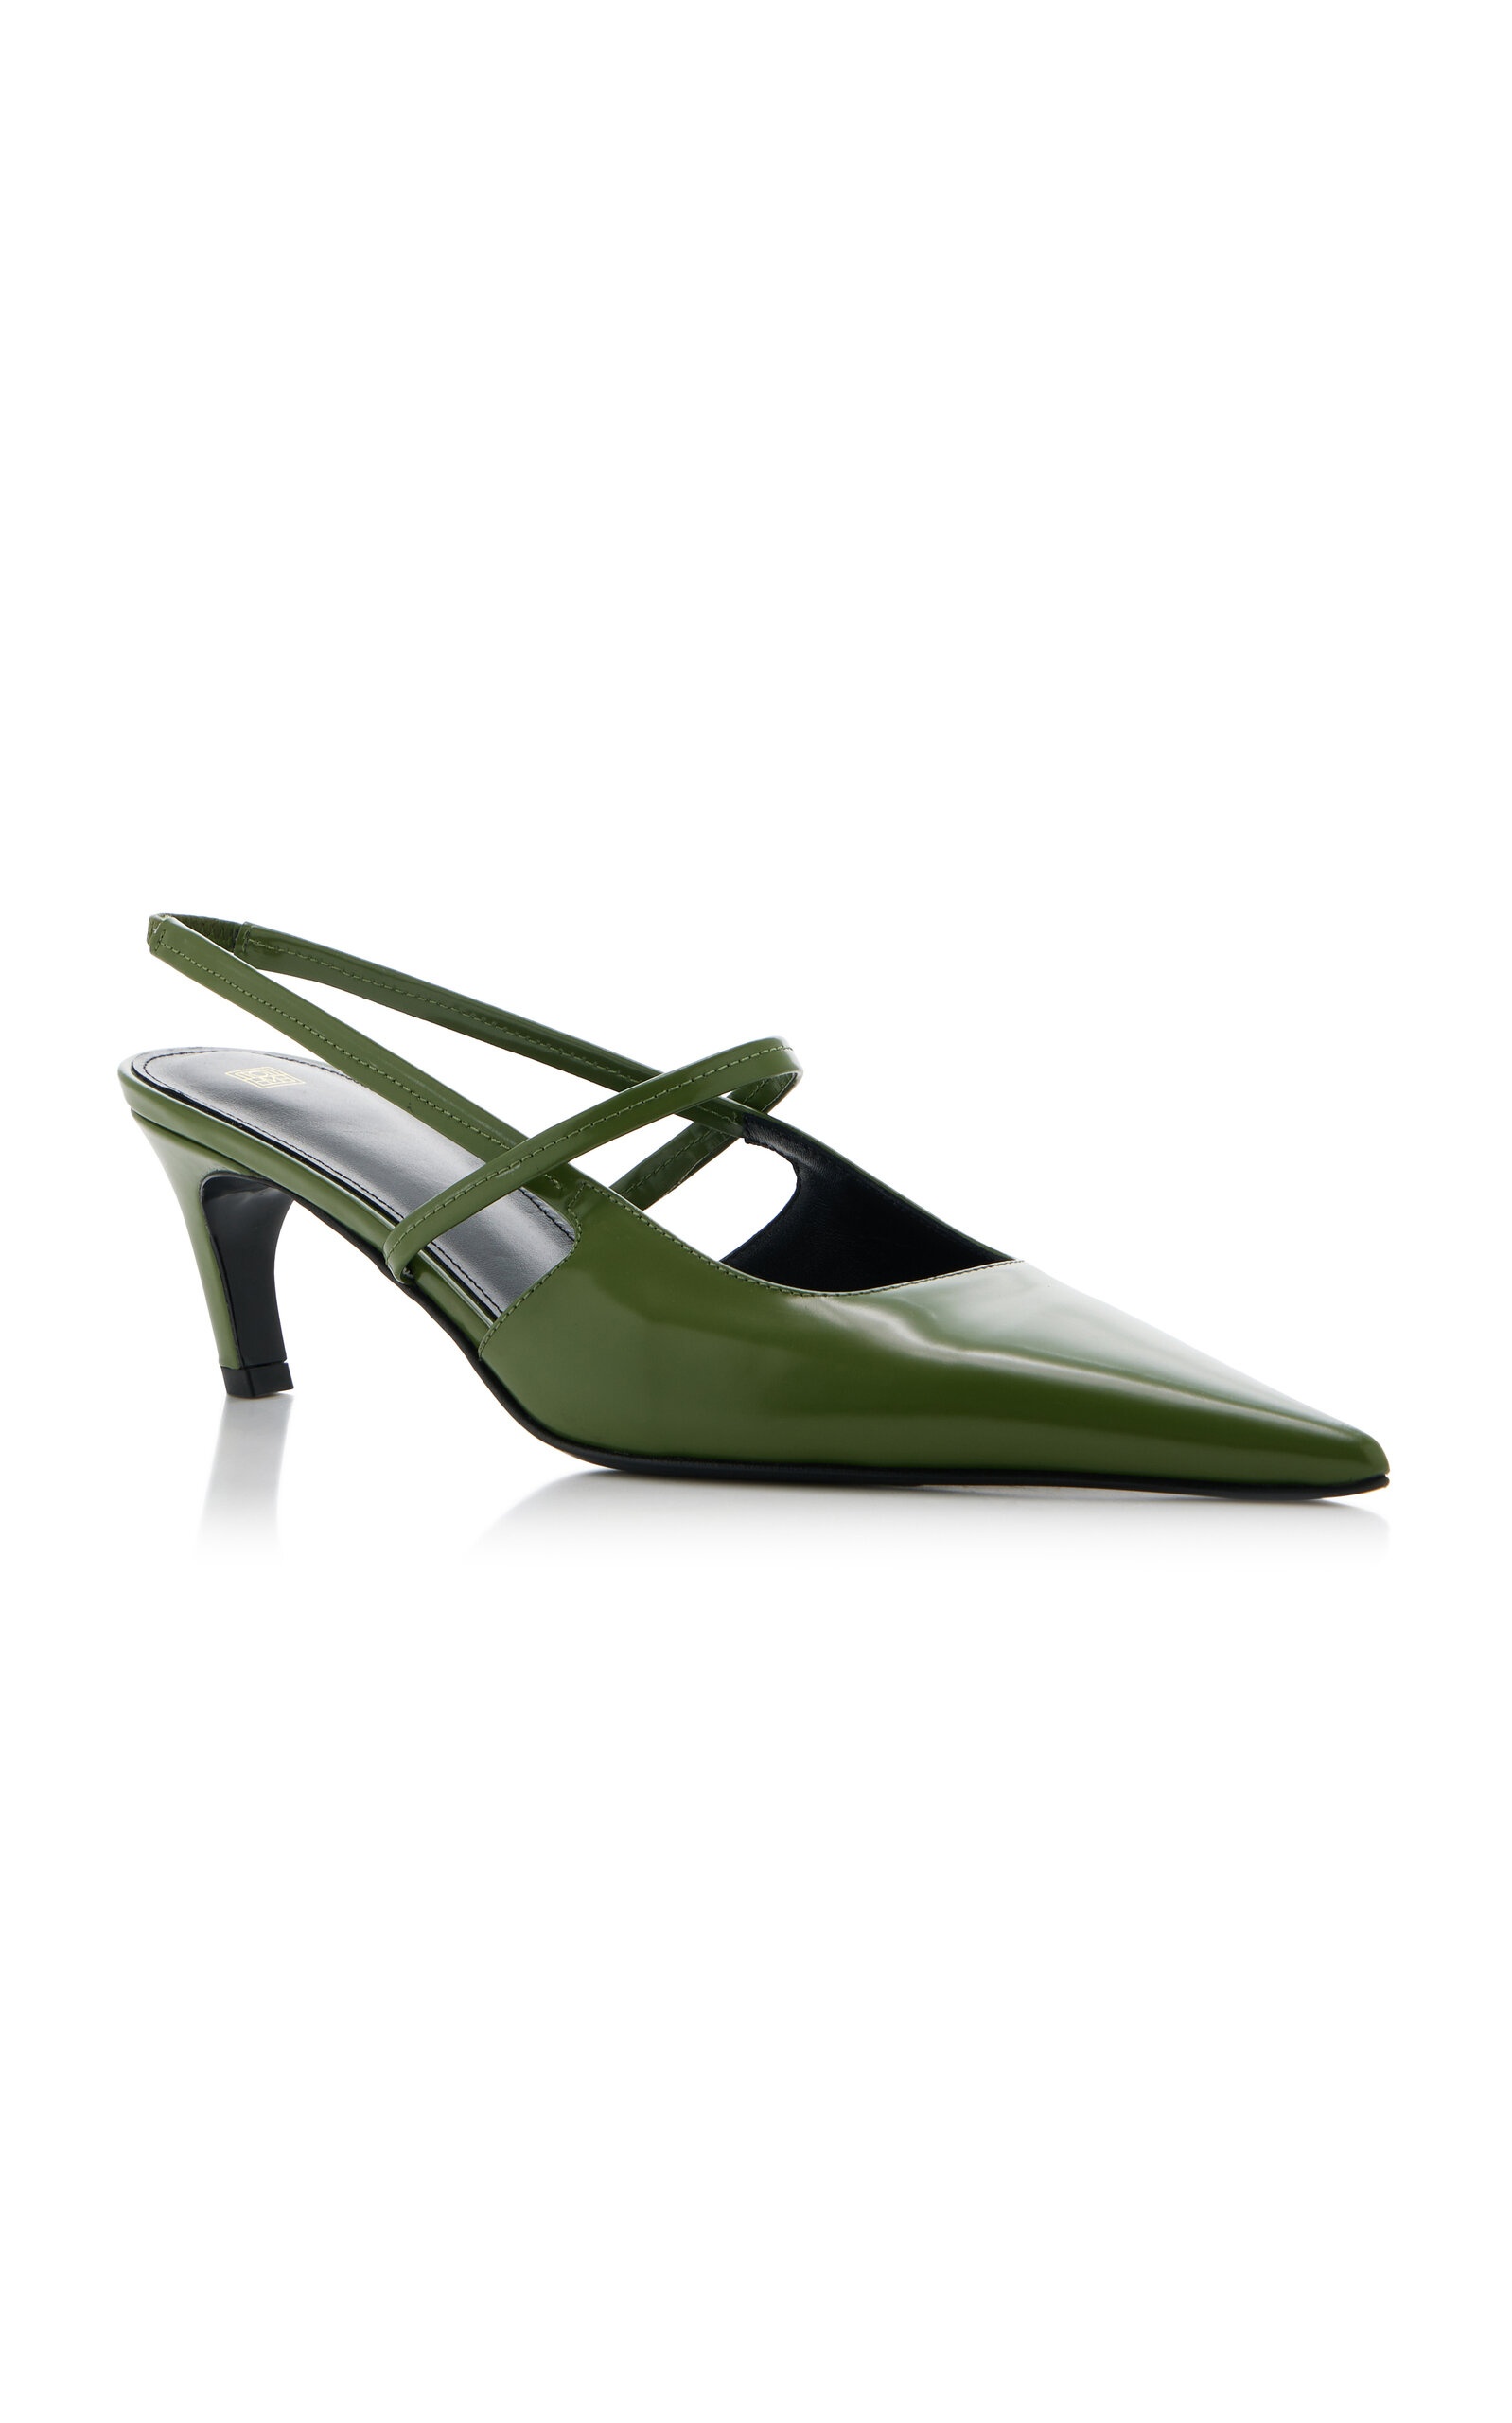 The Sharp Leather Slingback Pumps green - 4